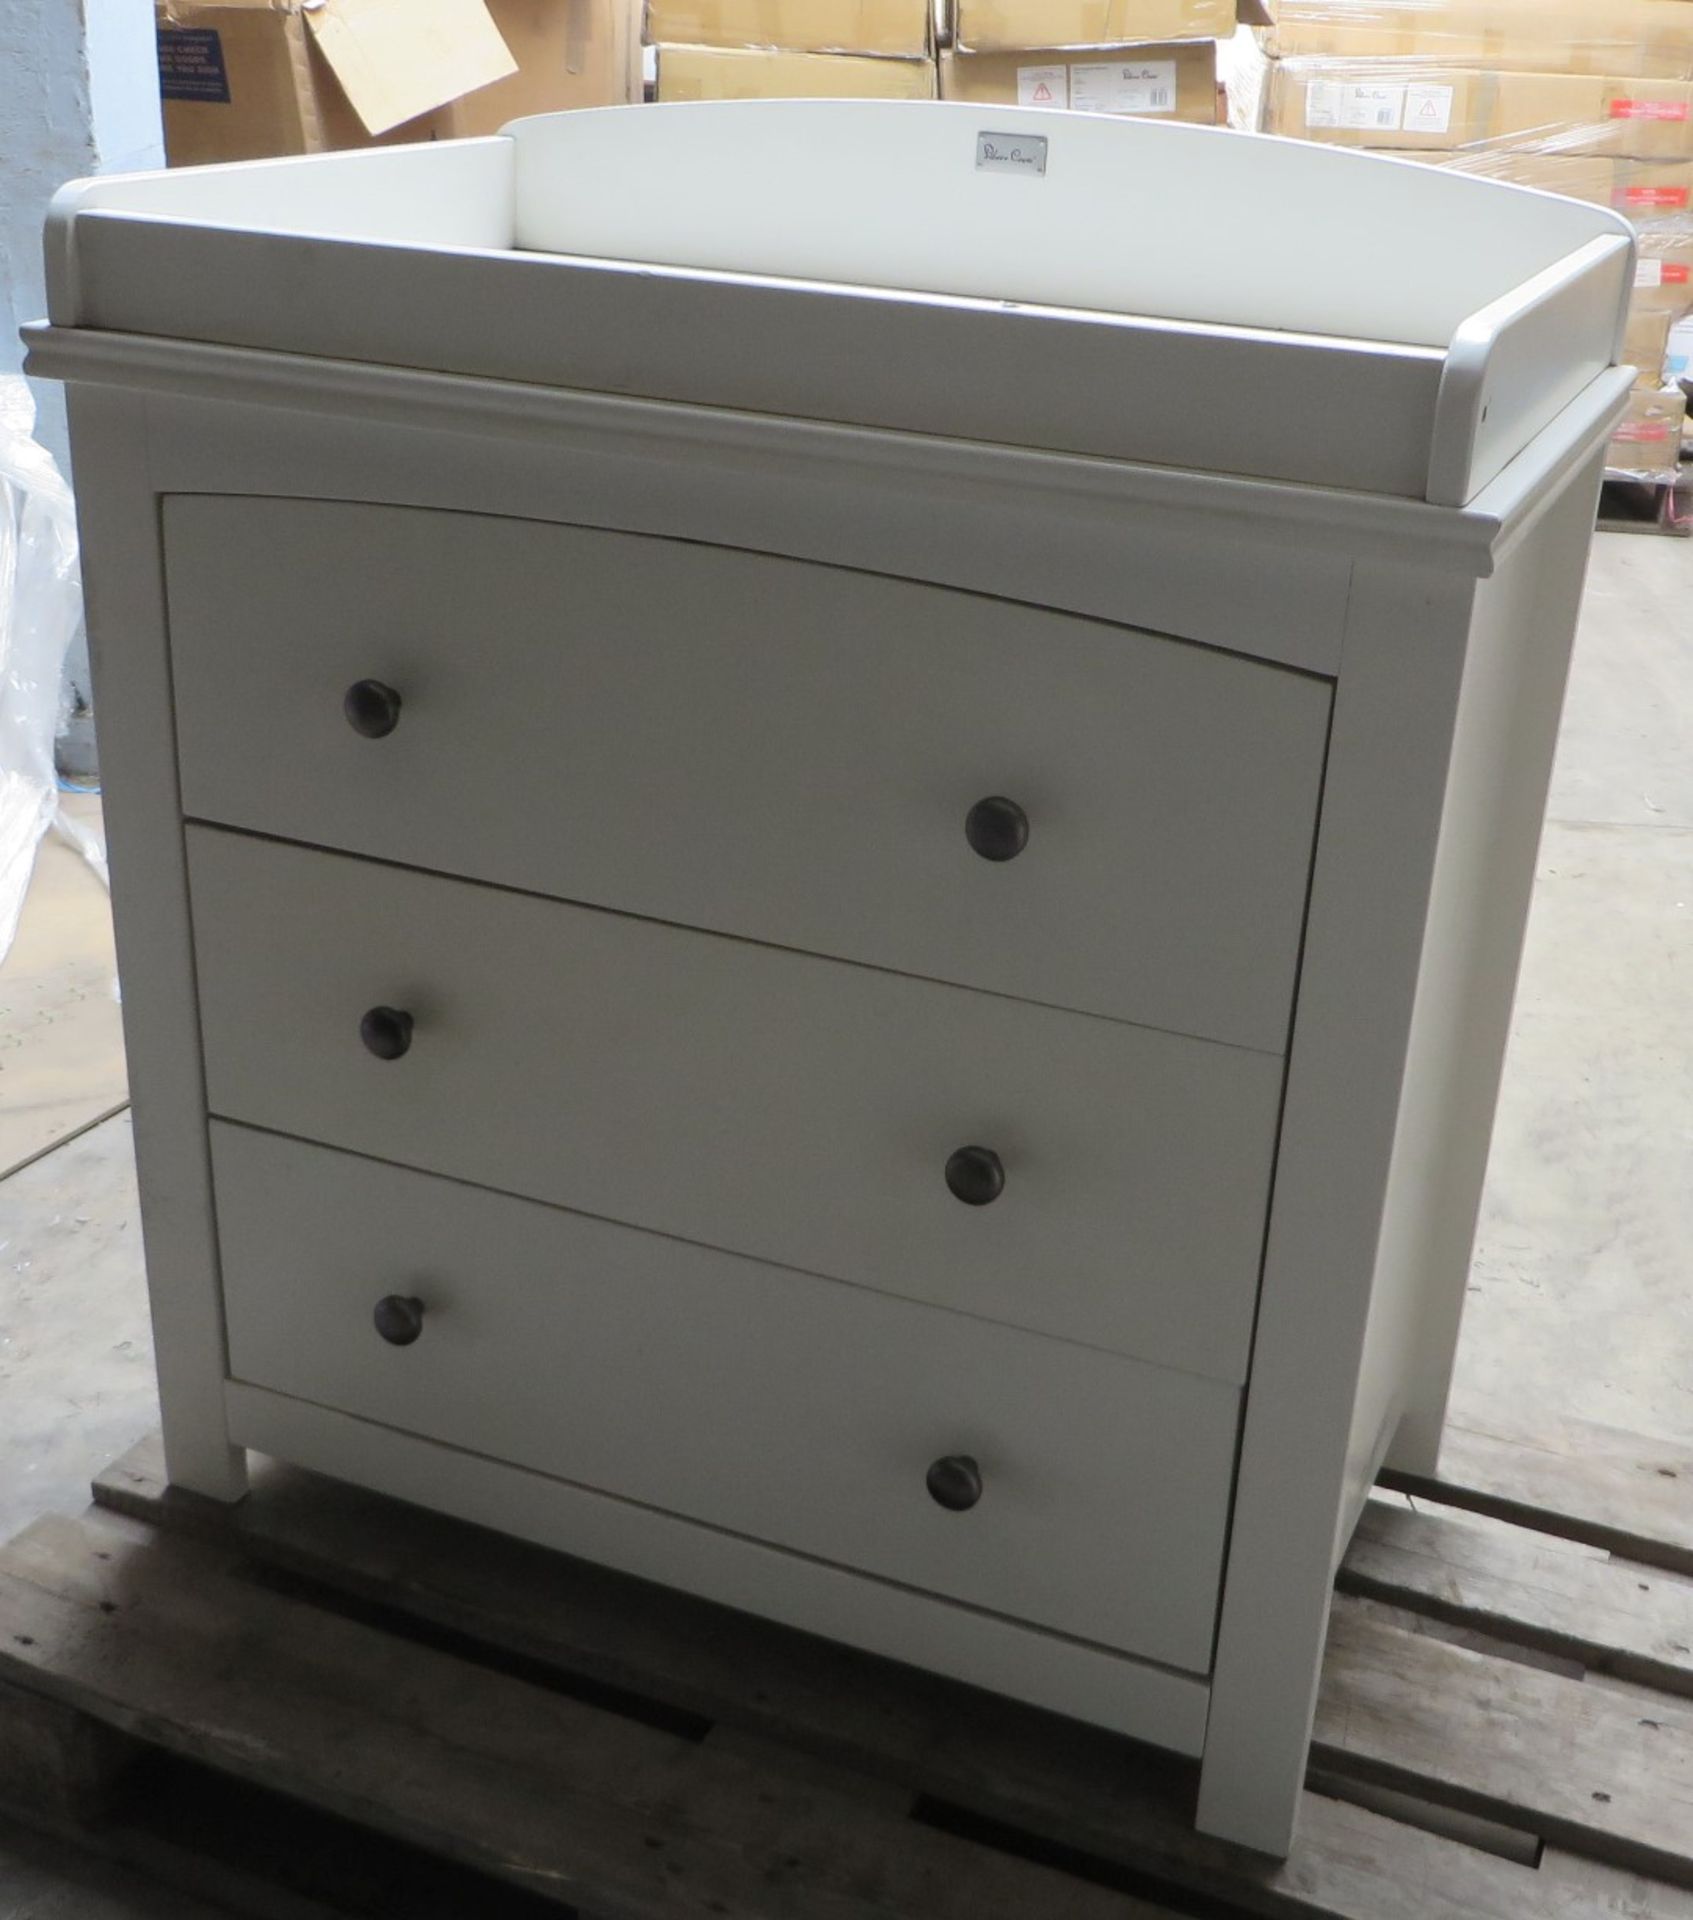 1 x Silver Cross Ashby Style Dresser Nursery Furniture - CL185 - Ref: DSY0230 - Location: Stoke-on- - Image 3 of 17